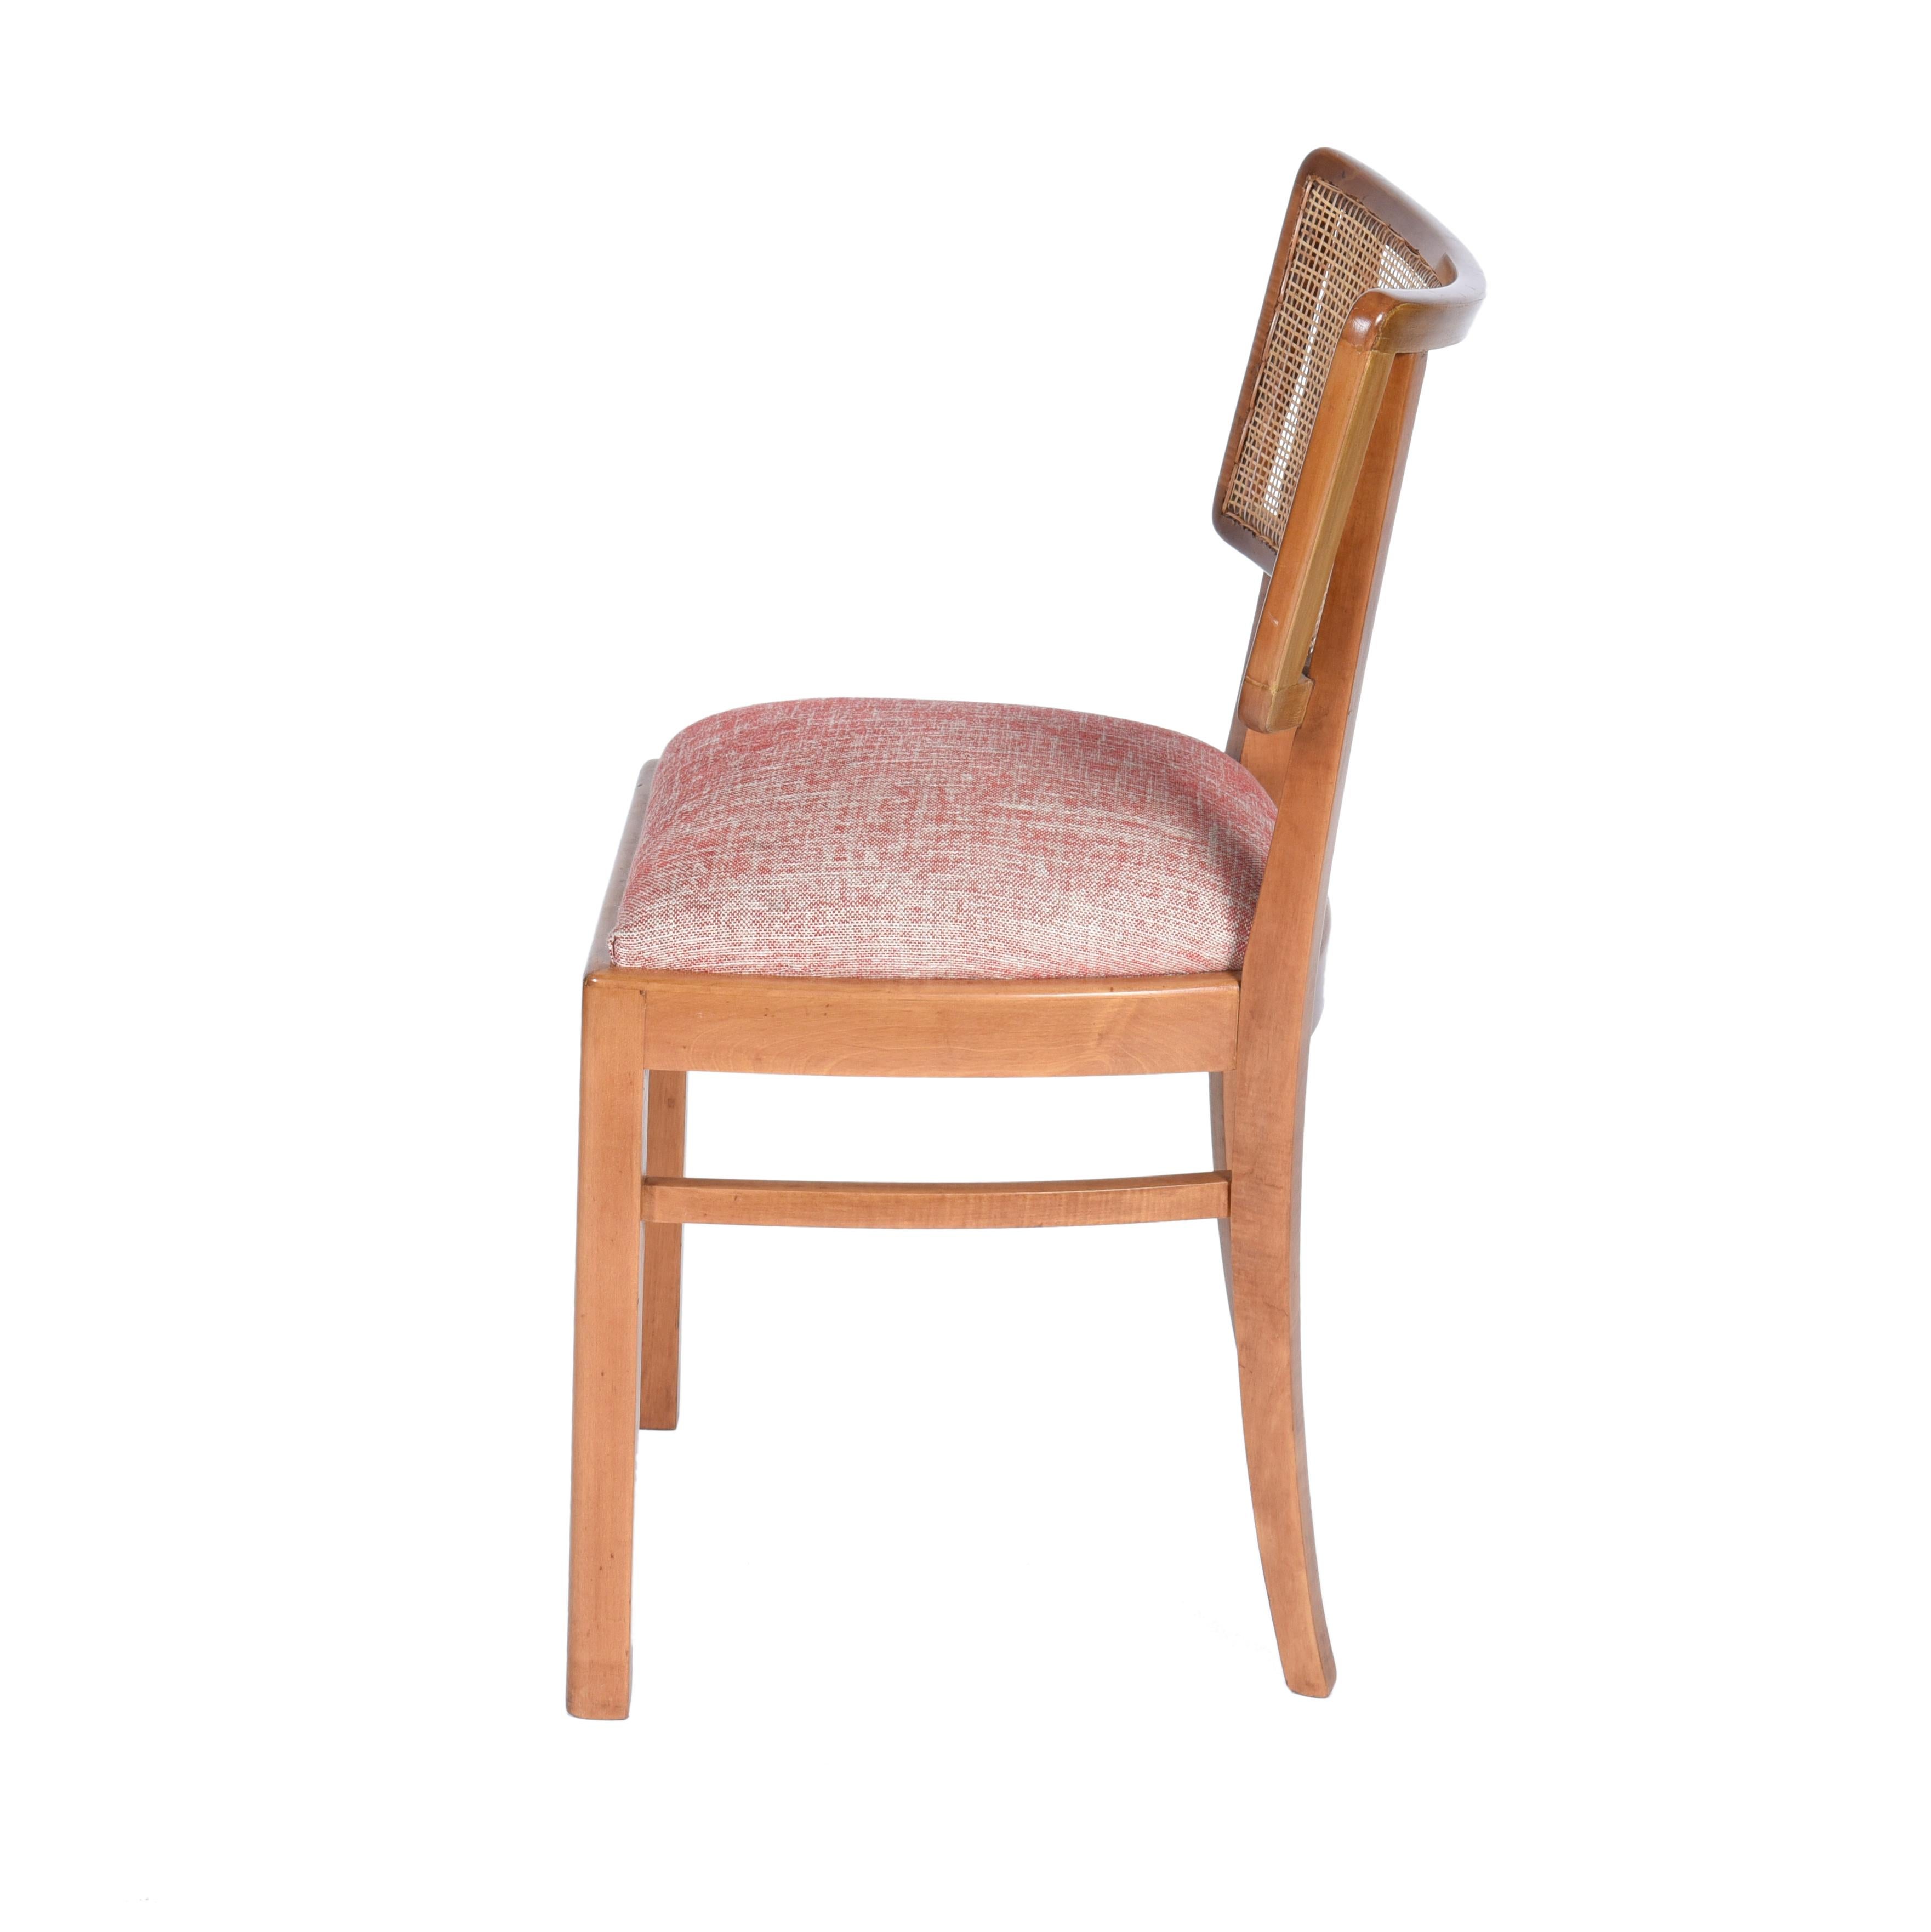 Mid-Century Modern Midcentury Brazilian Chair in Ivory Wood and Straw, 1960s For Sale